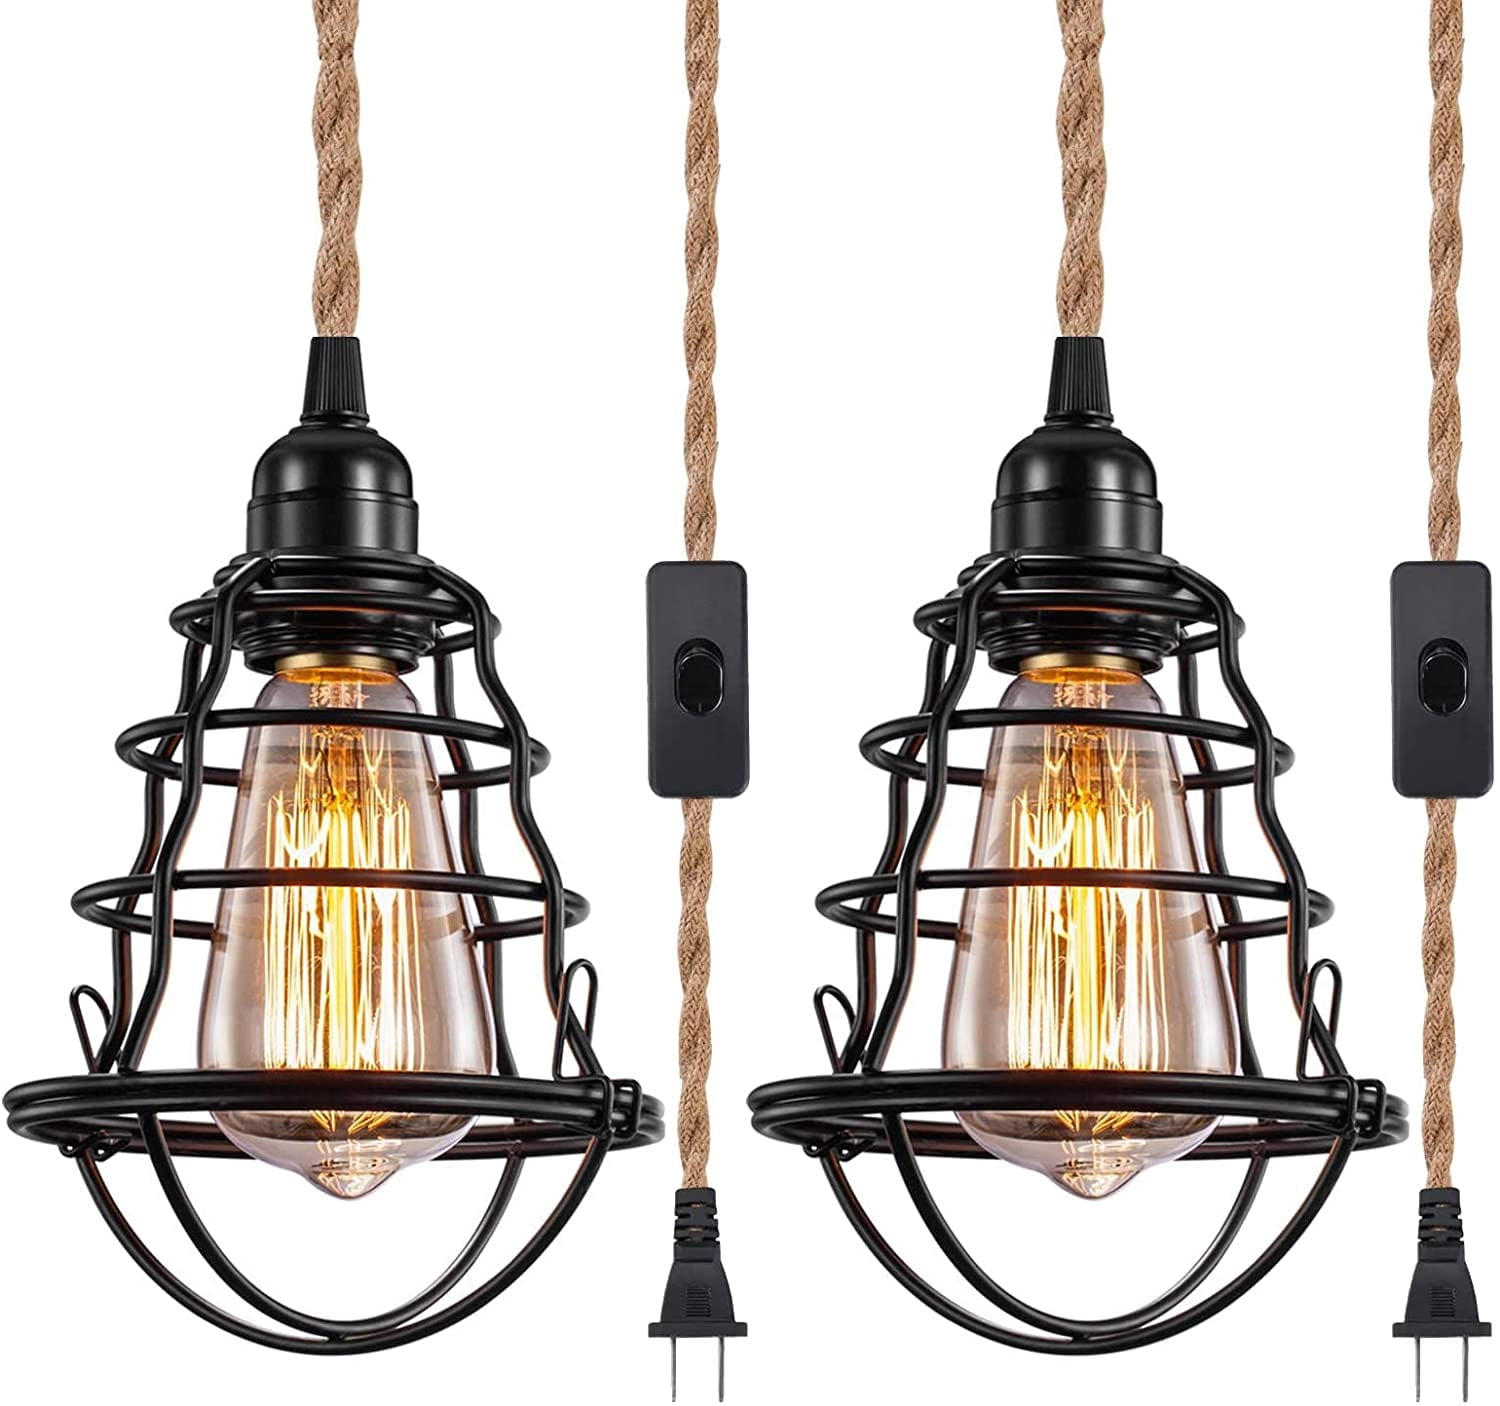 2 Hanging Lamps Swag Lights Plug in Pendant Light with On/Off Switch Wire Caged Pendant Hemp Rope - Walmart.com